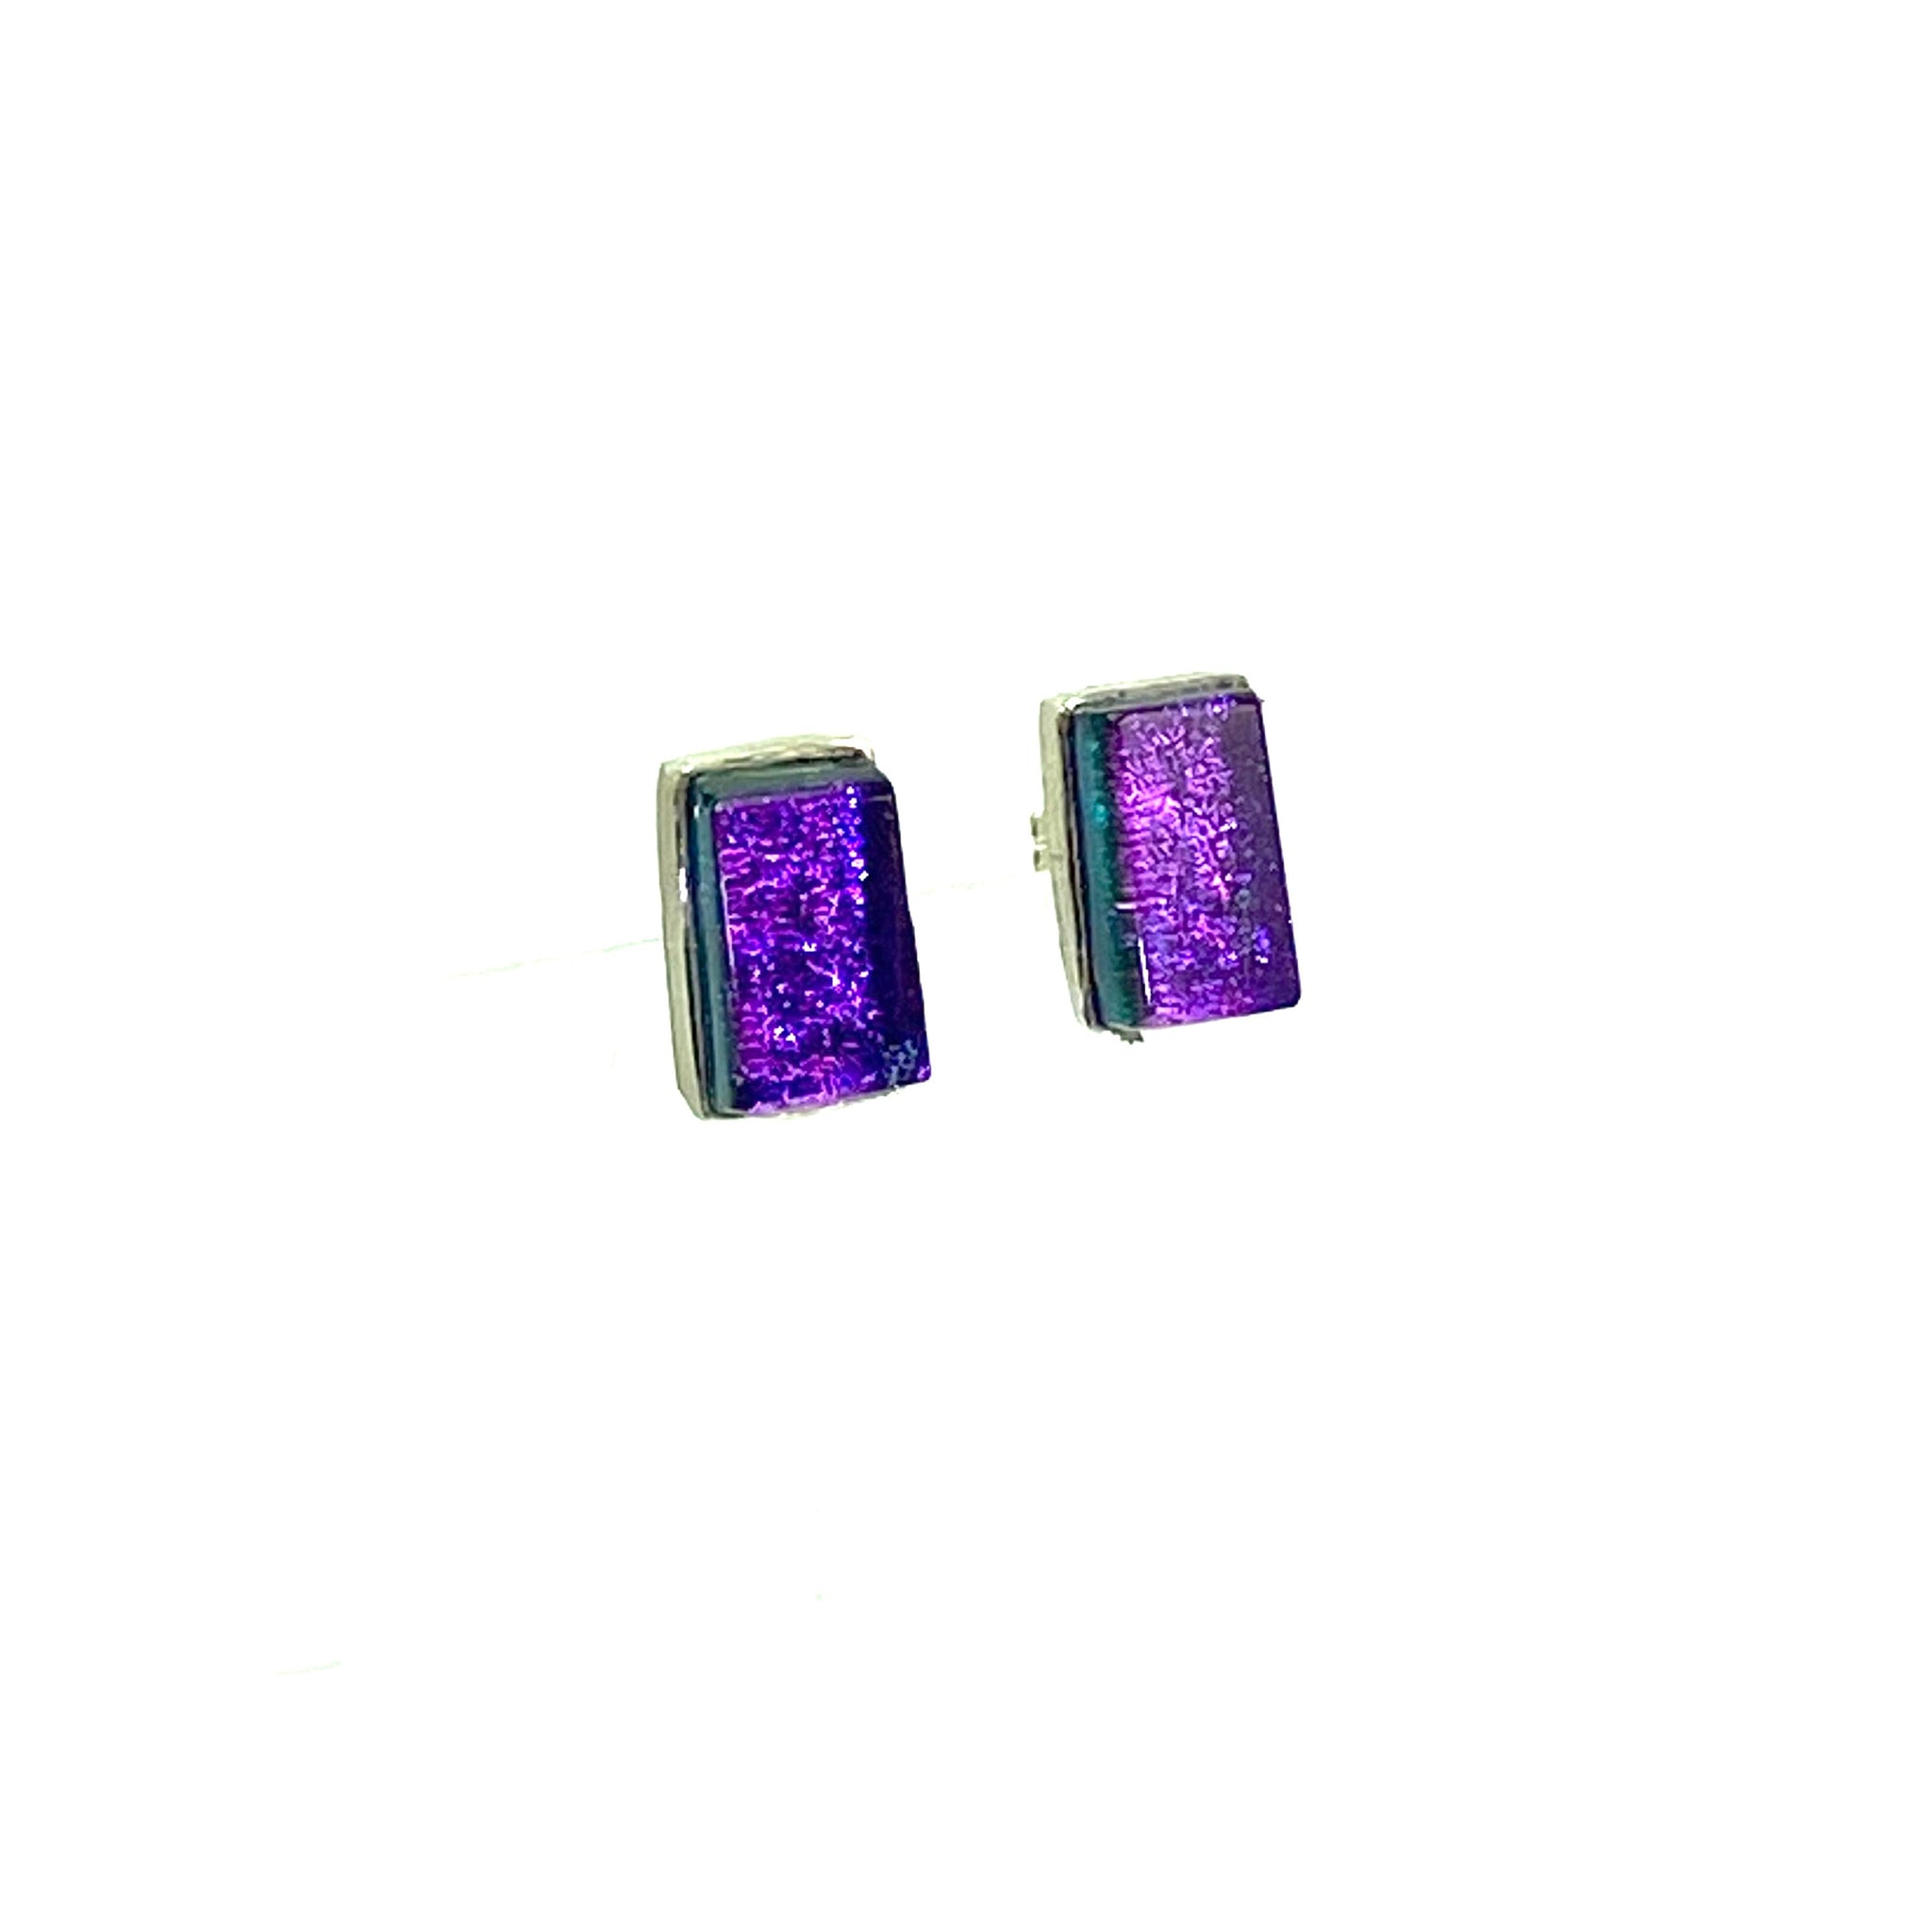 purple, rectangle earrings, fused glass, glass jewelry, glass and silver jewelry, handmade, handcrafted, American Craft, hand fabricated jewelry, hand fabricated jewellery,  Athen, Georgia, colorful jewelry, sparkle, bullseye glass, dichroic glass, art jewelry